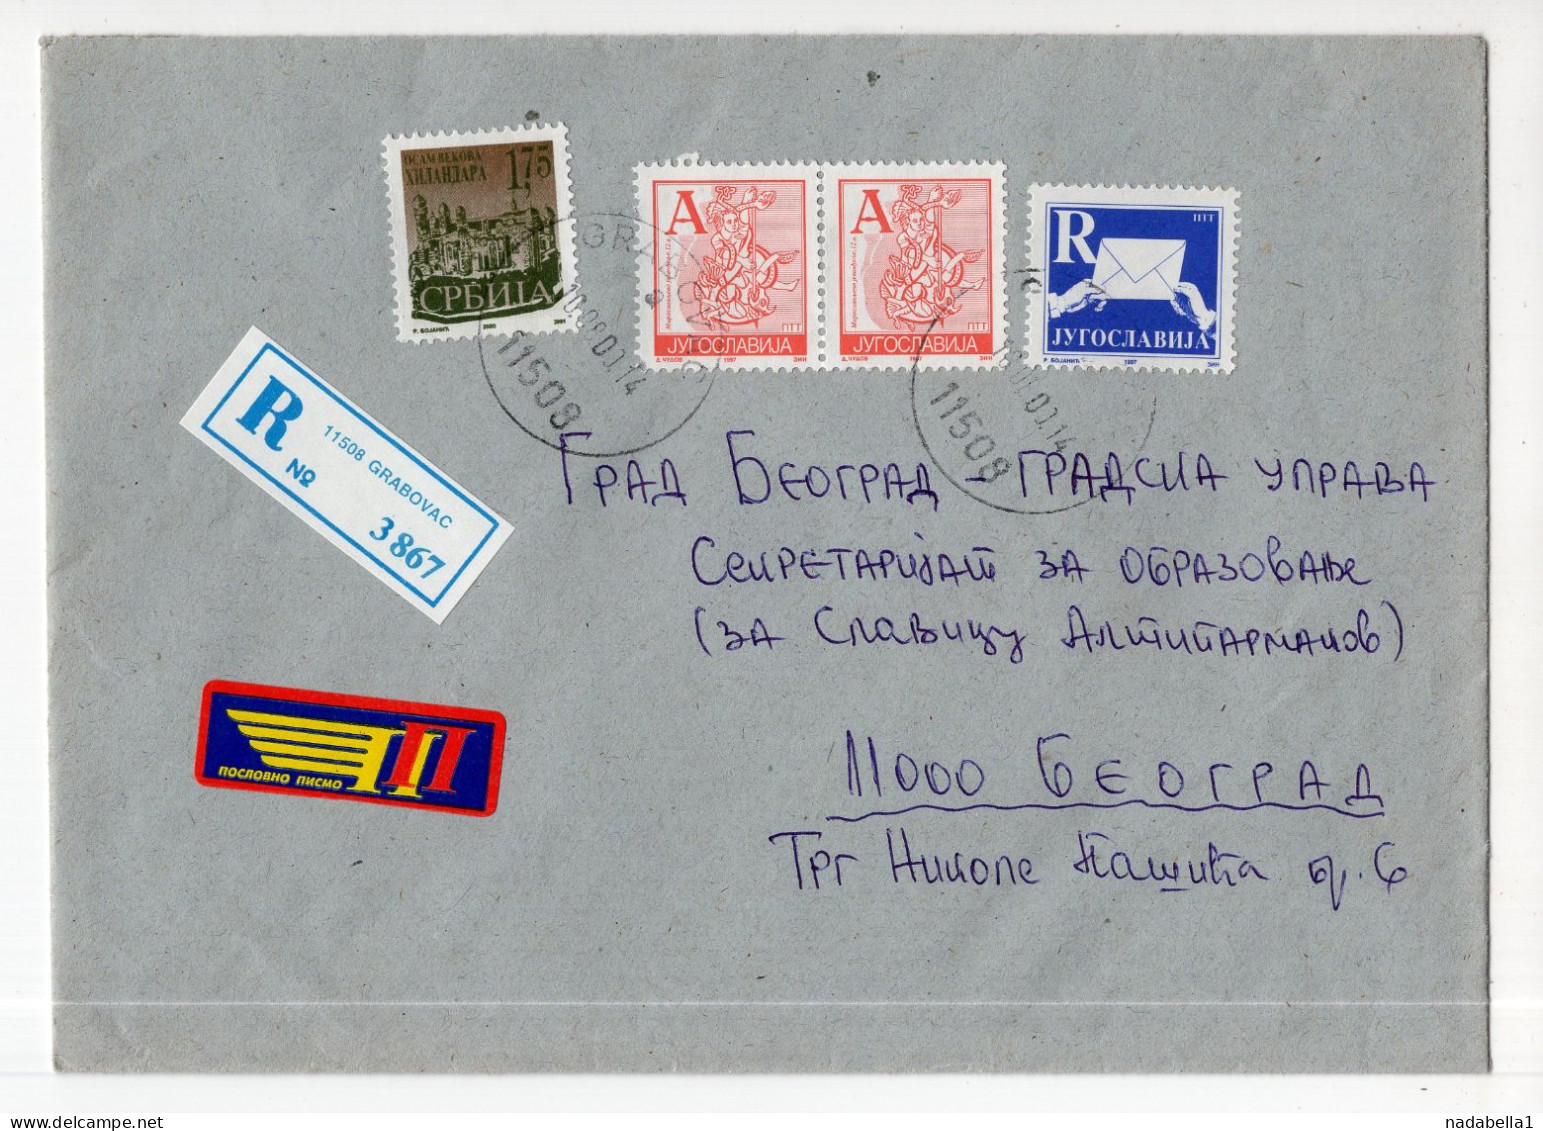 2000. YUGOSLAVIA,SERBIA,GRABOVAC RECORDED COVER USED TO BELGRADE,8 CENTURIES OF HILANDAR MONASTERY STAMP - Covers & Documents